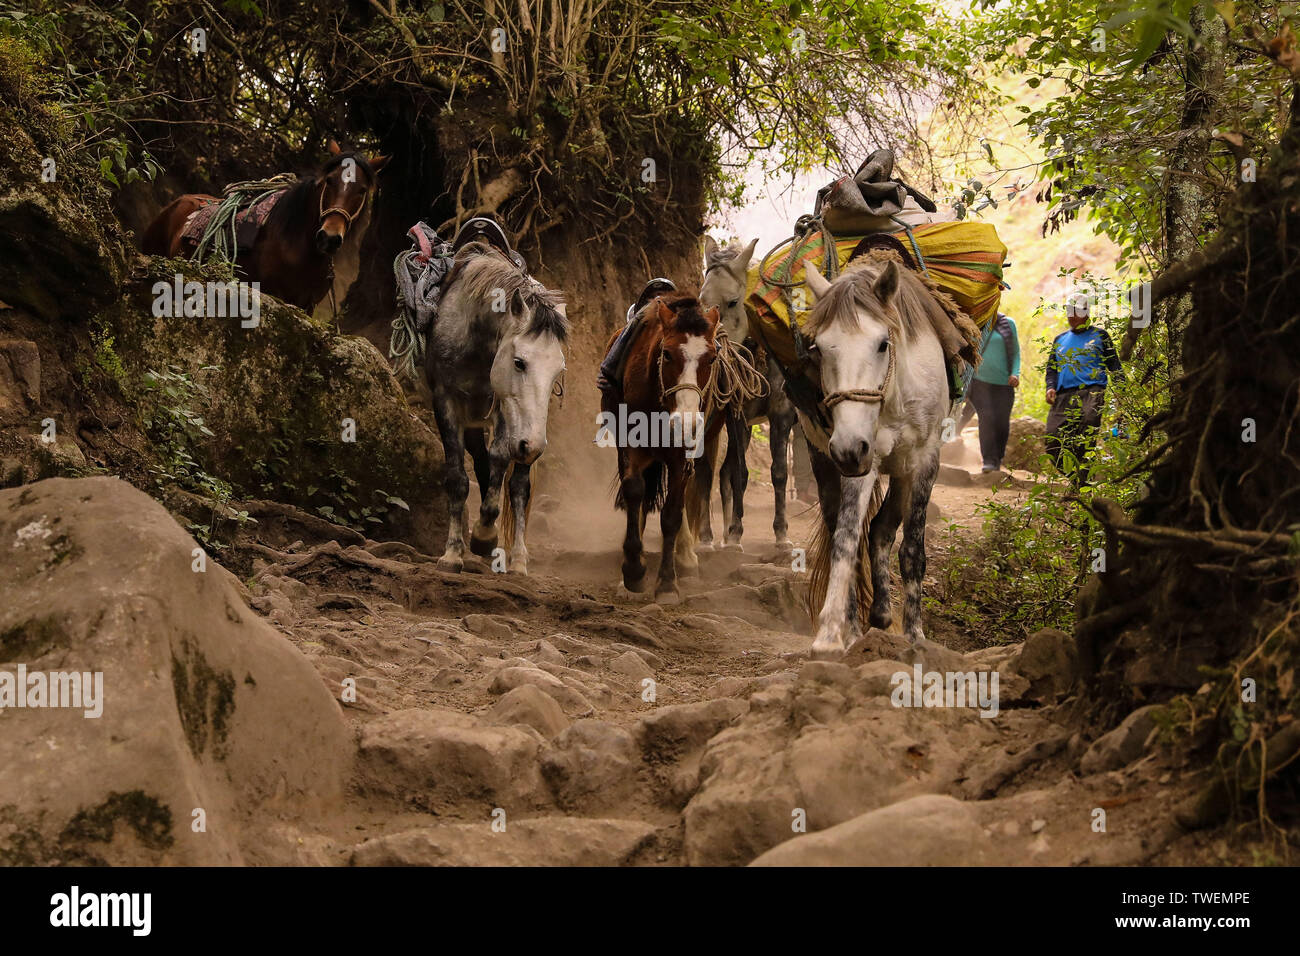 Inka Trail, Peru. 02nd May, 2019. Horses carry tourists' luggage in the  rough terrain of the Inca Trail. Credit: Tino  Plunert/dpa-Zentralbild/ZB/dpa/Alamy Live News Stock Photo - Alamy